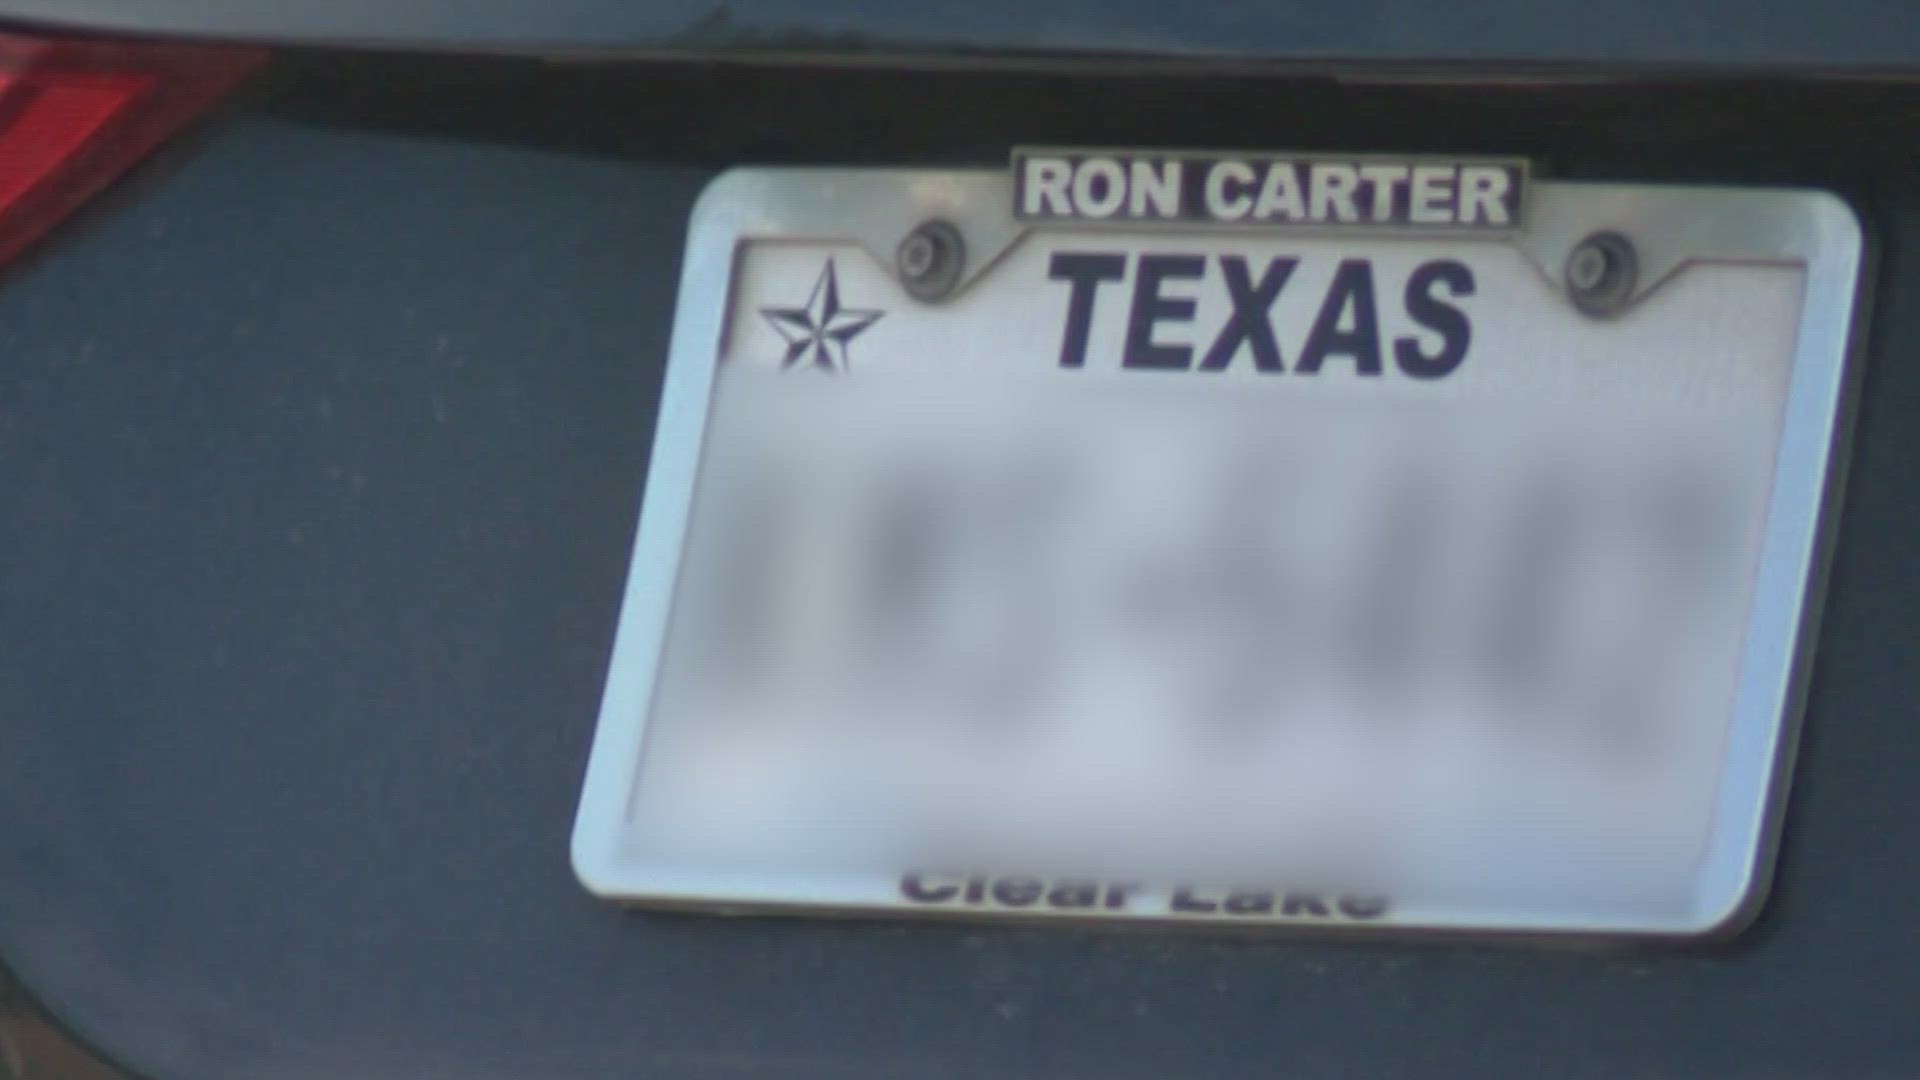 A San Antonio woman says her license plate was swapped with a stolen one. Courtney Wingo says the crime left her stranded, and cost her hundreds of dollars.